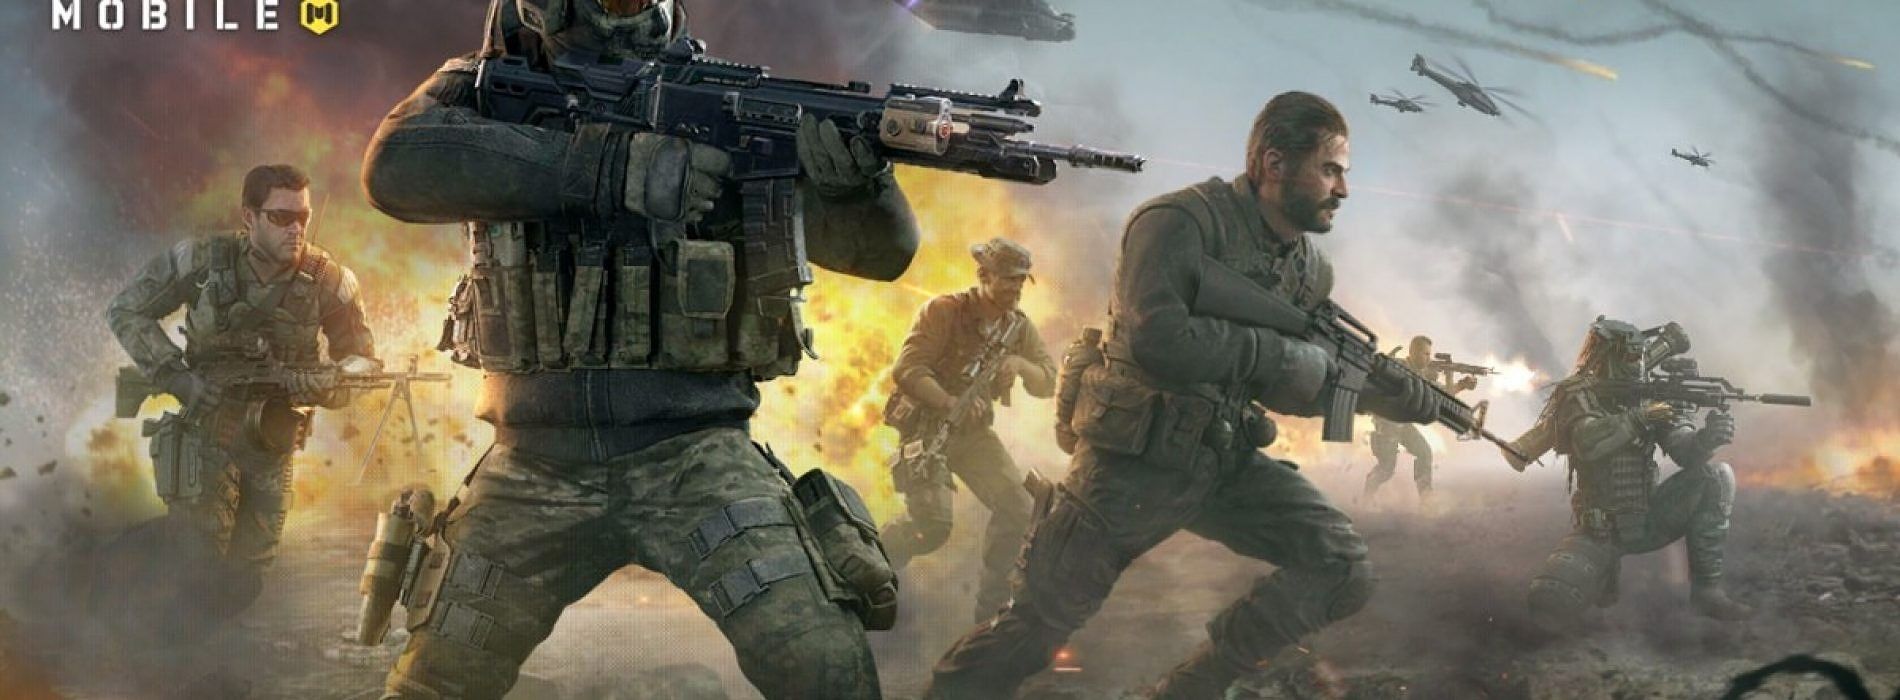 Call of Duty: Mobile now available for download on Android